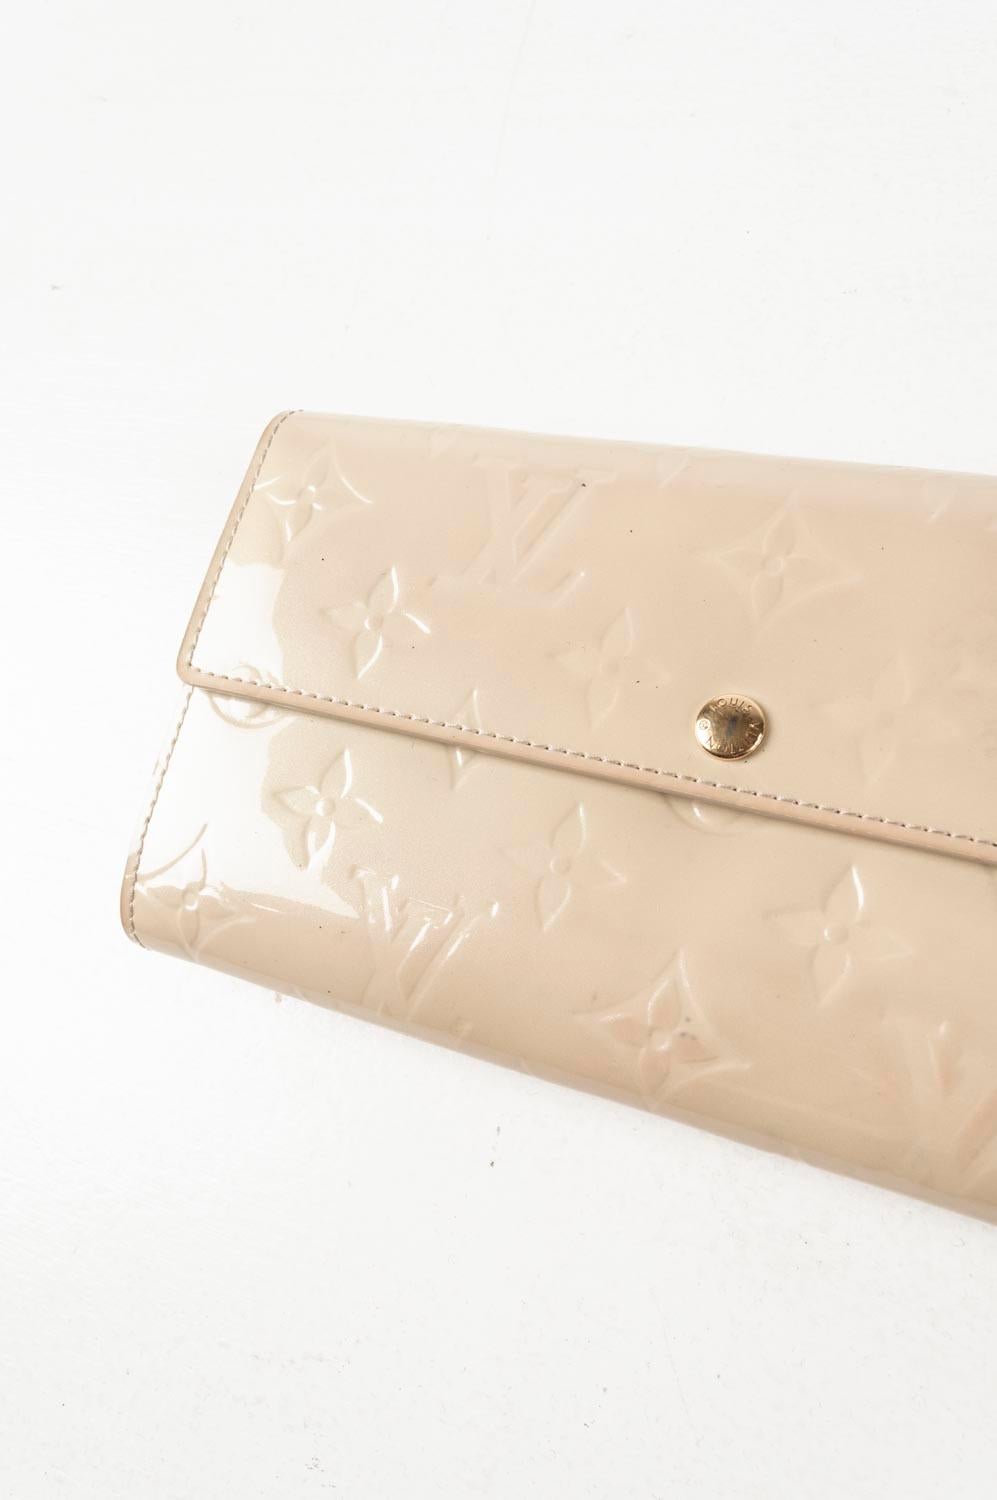 Item for sale is 100% genuine Louis Vuitton Patent Leather Woman, S421
Color: Cream
(An actual color may a bit vary due to individual computer screen interpretation)
Material: Patent Leather
Tag size: One Size  
This wallet is great quality item.